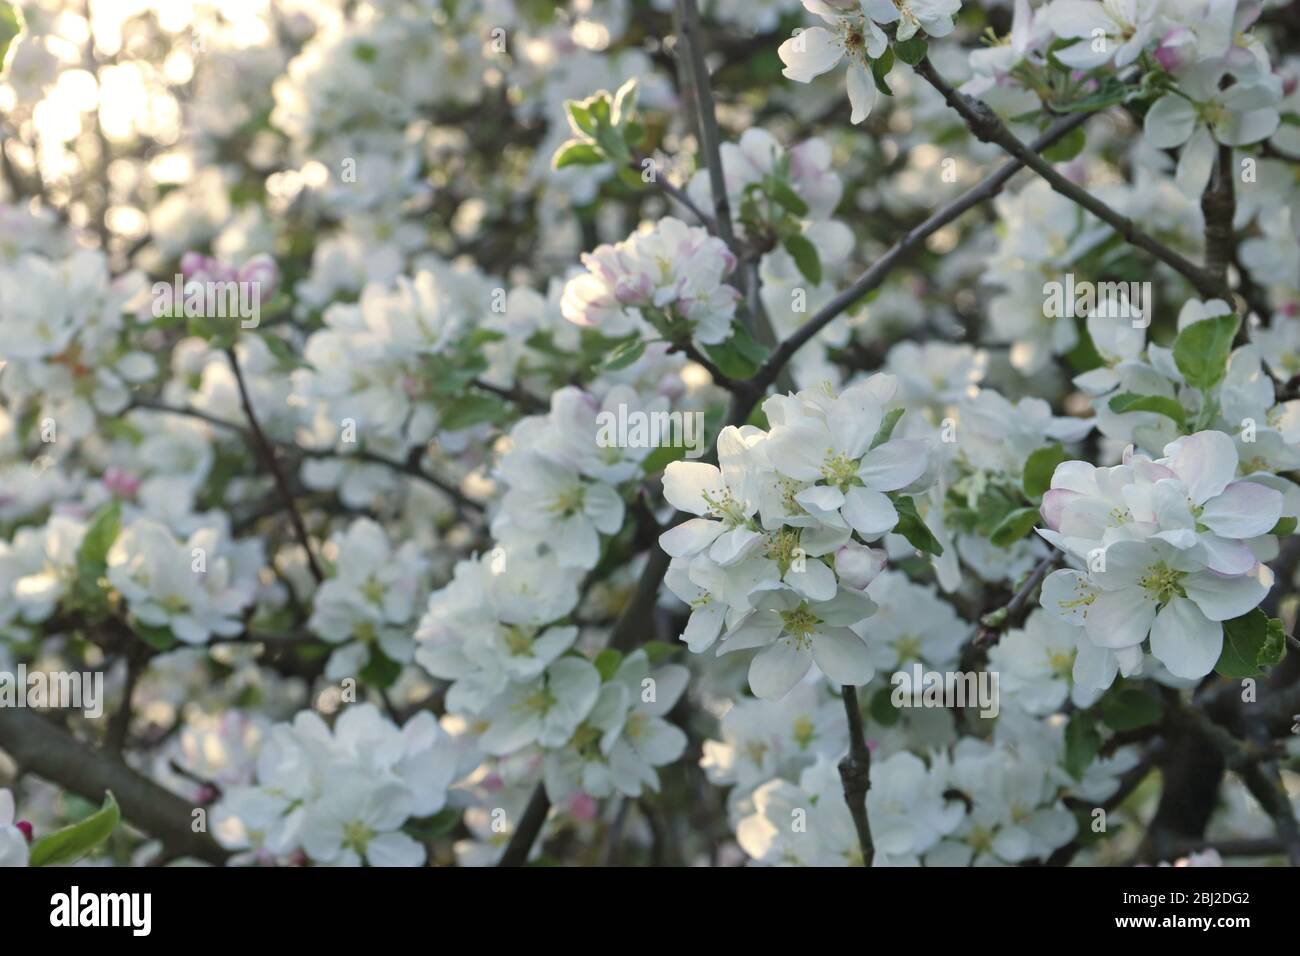 abundance of white and pink apple blossoms on a tree, back lit Stock Photo